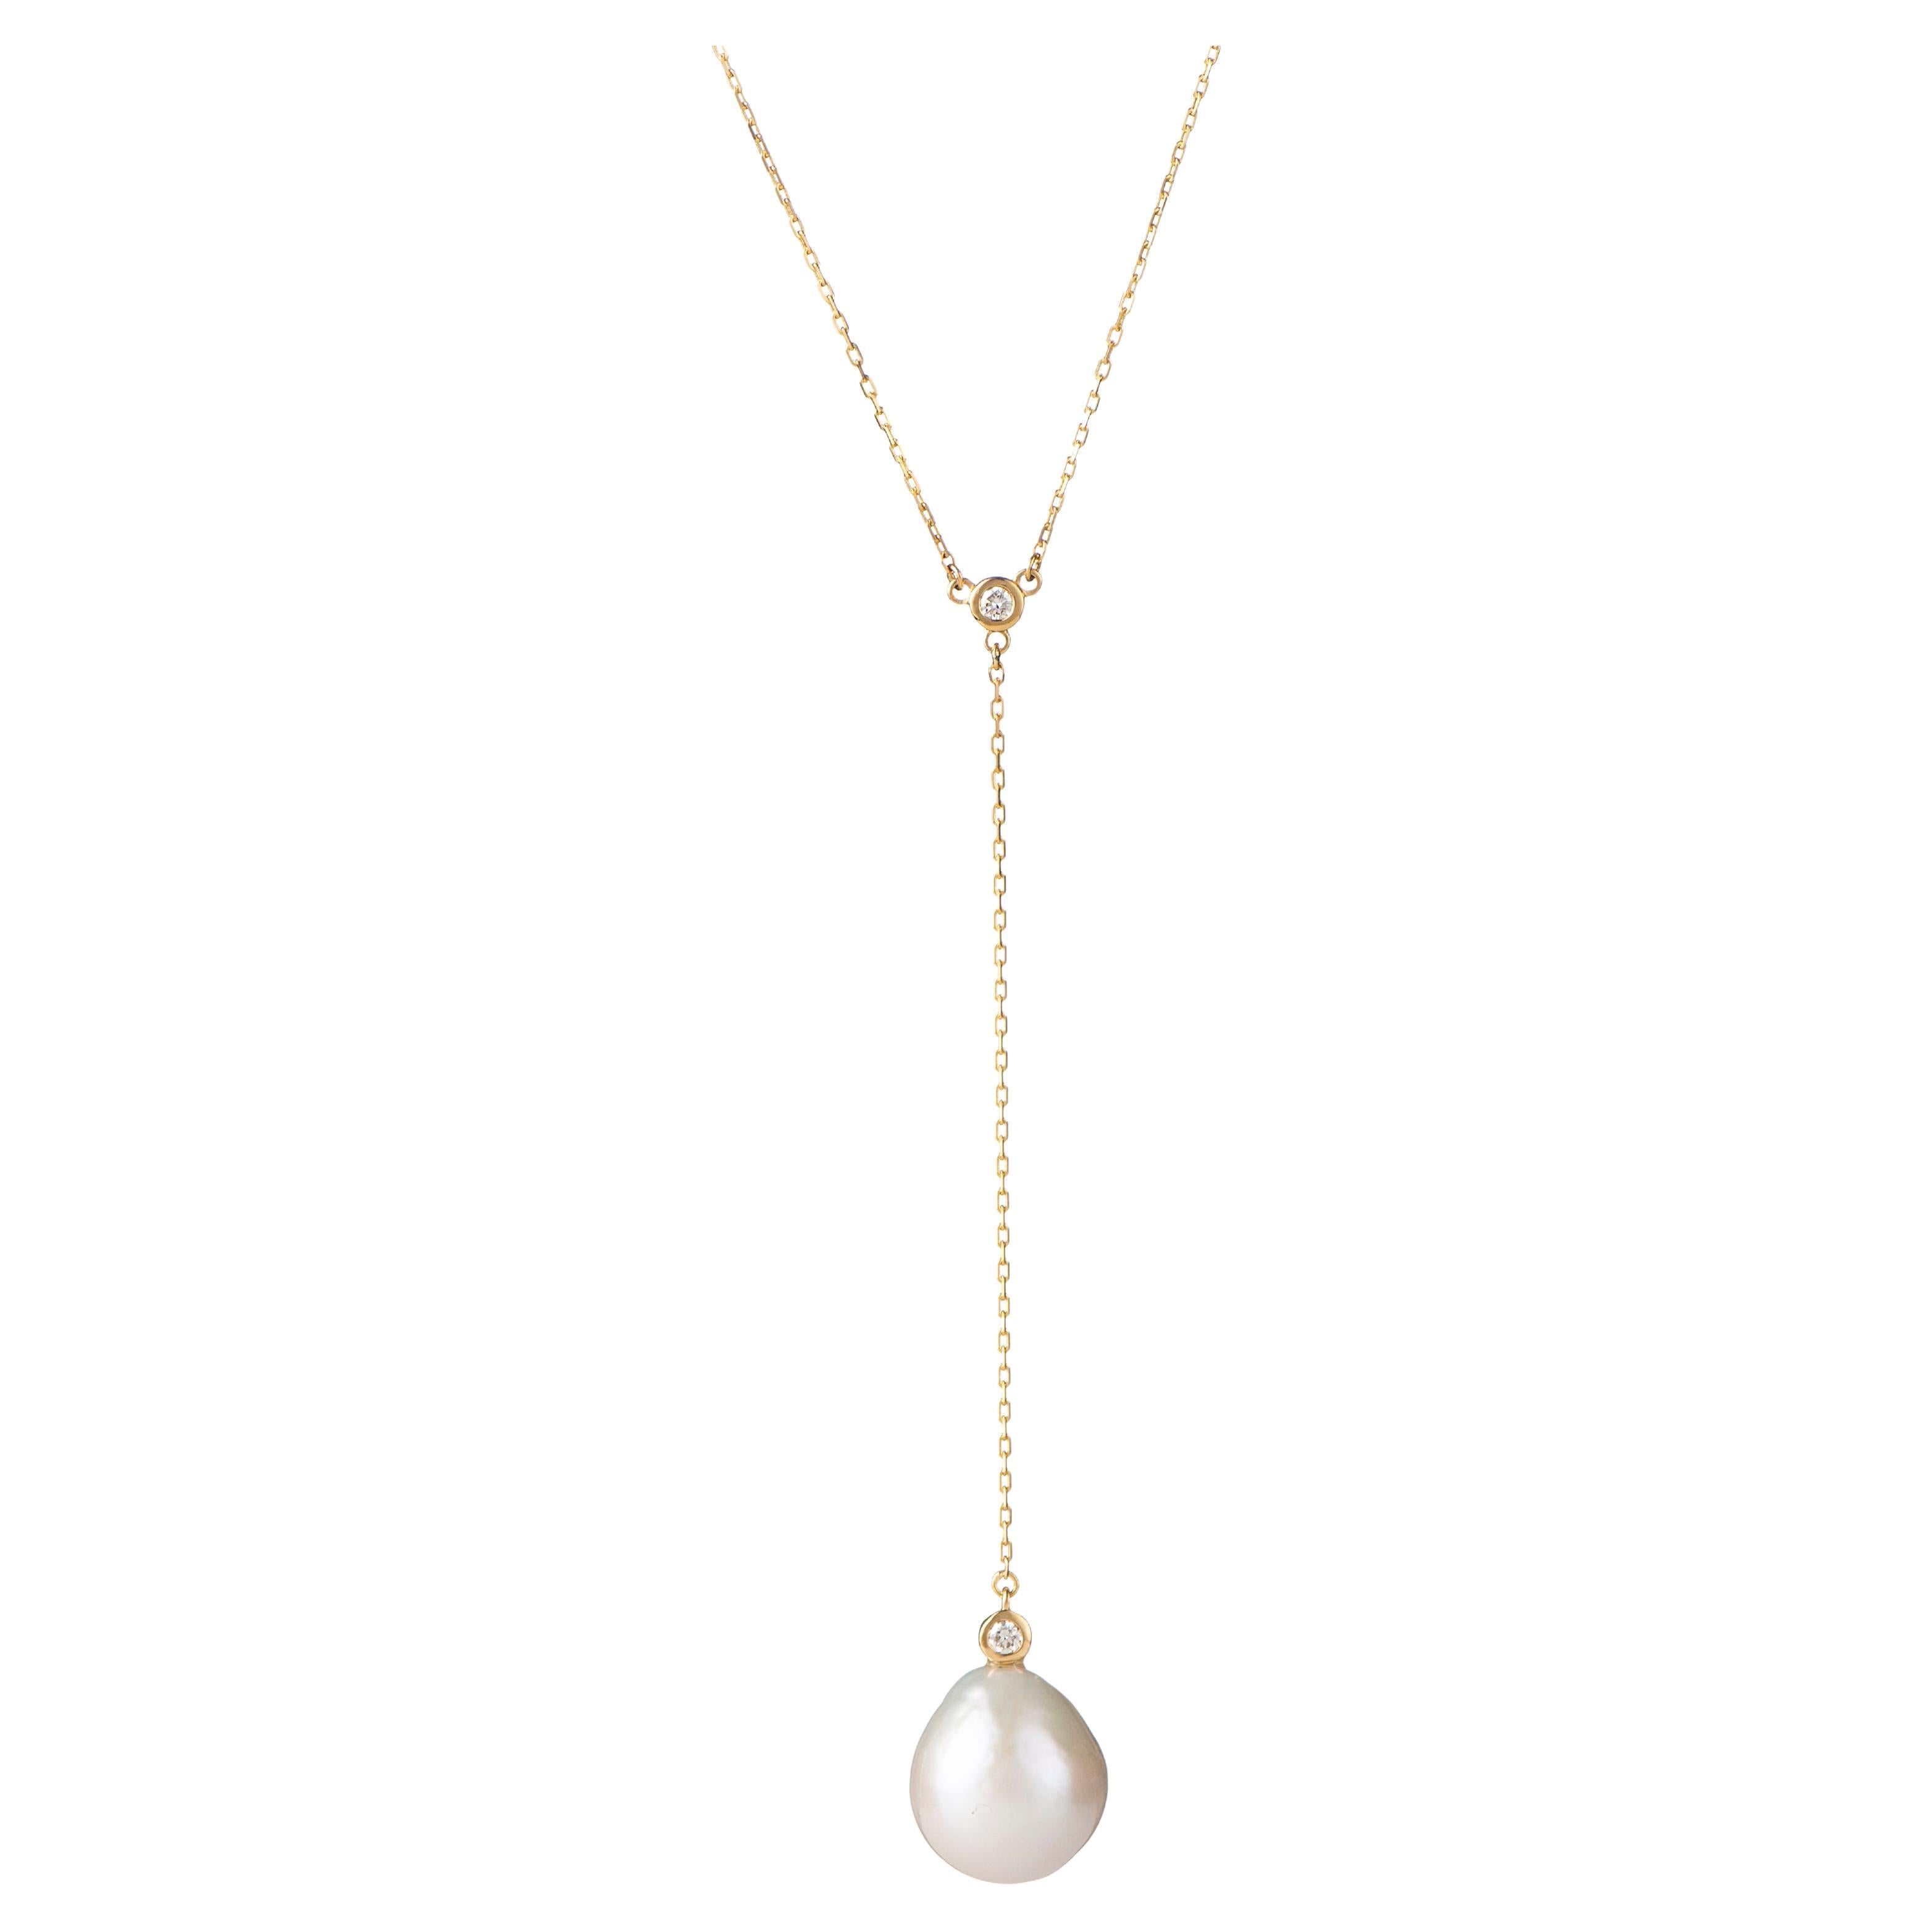 Baroque Pearl and Diamonds Lariat Necklace, by Michelle Massoura